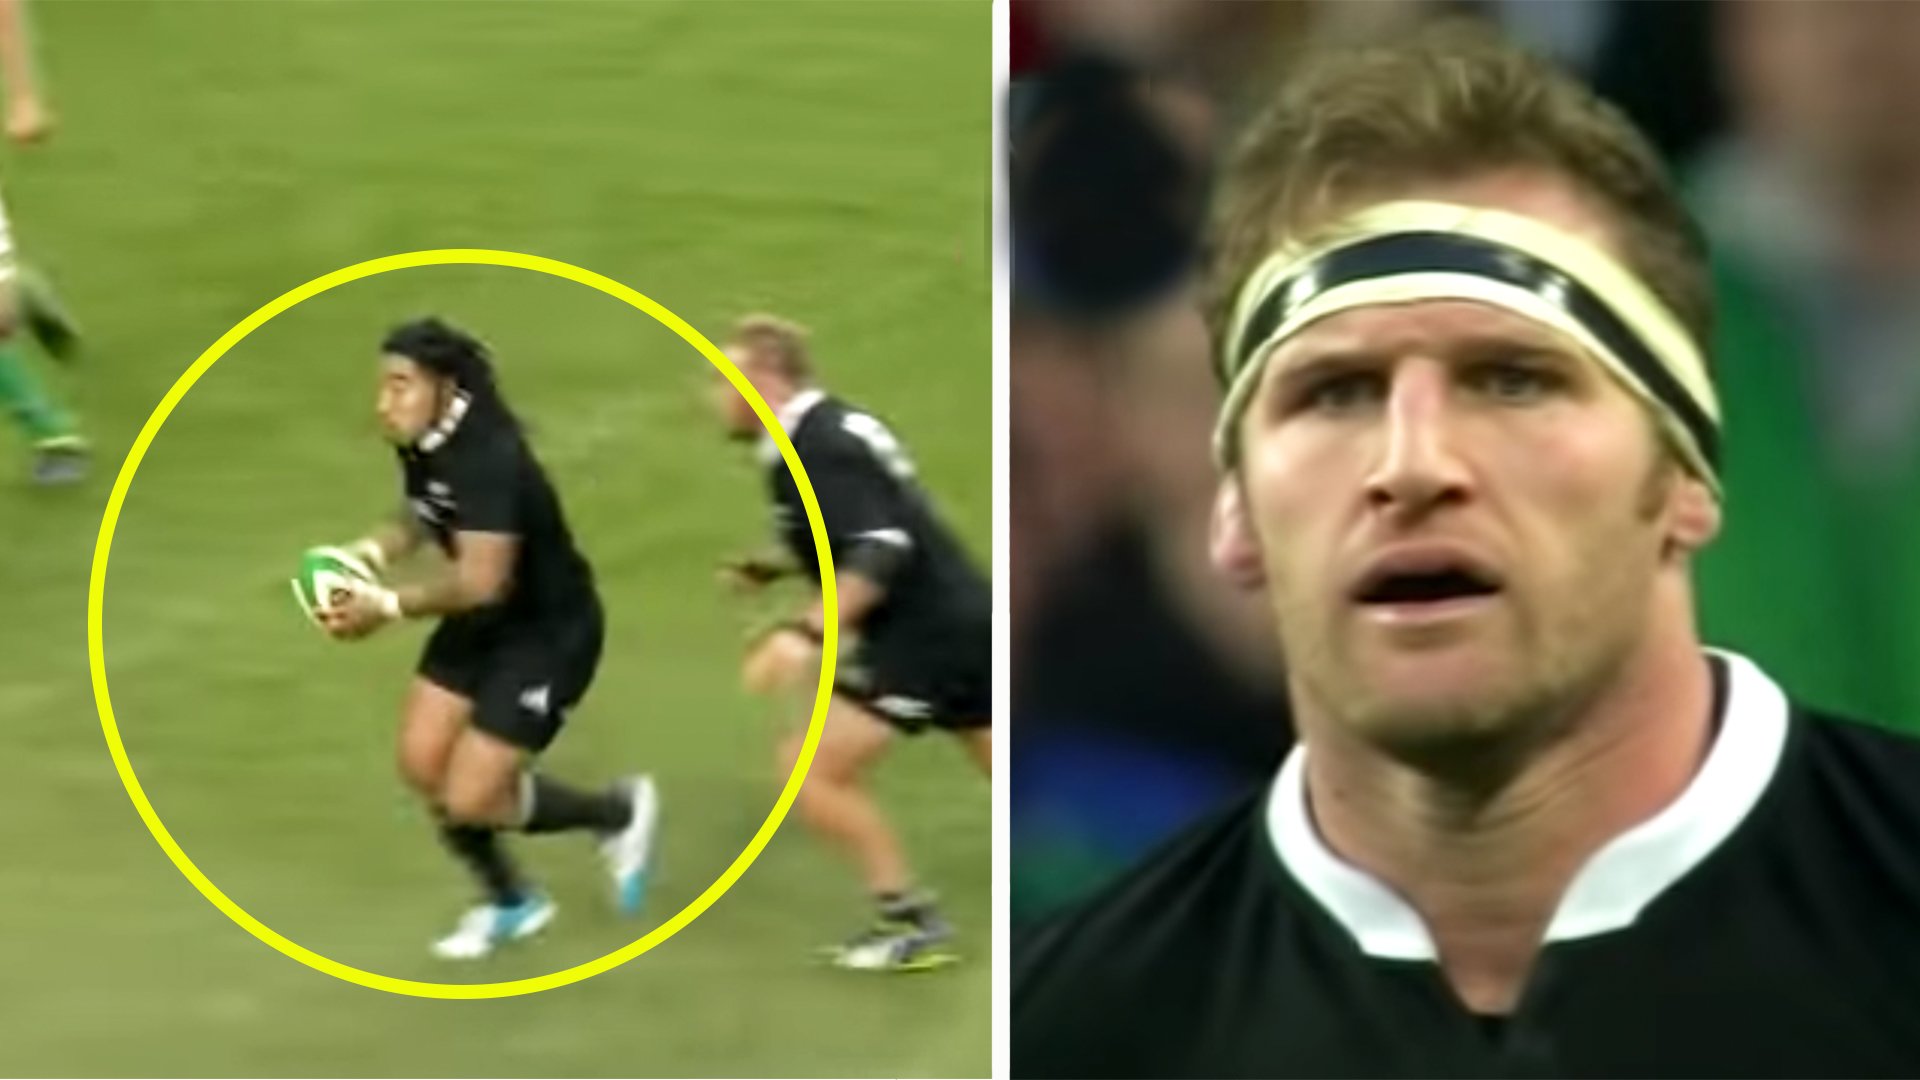 New video proves the 2013 All Blacks were the greatest team of all time